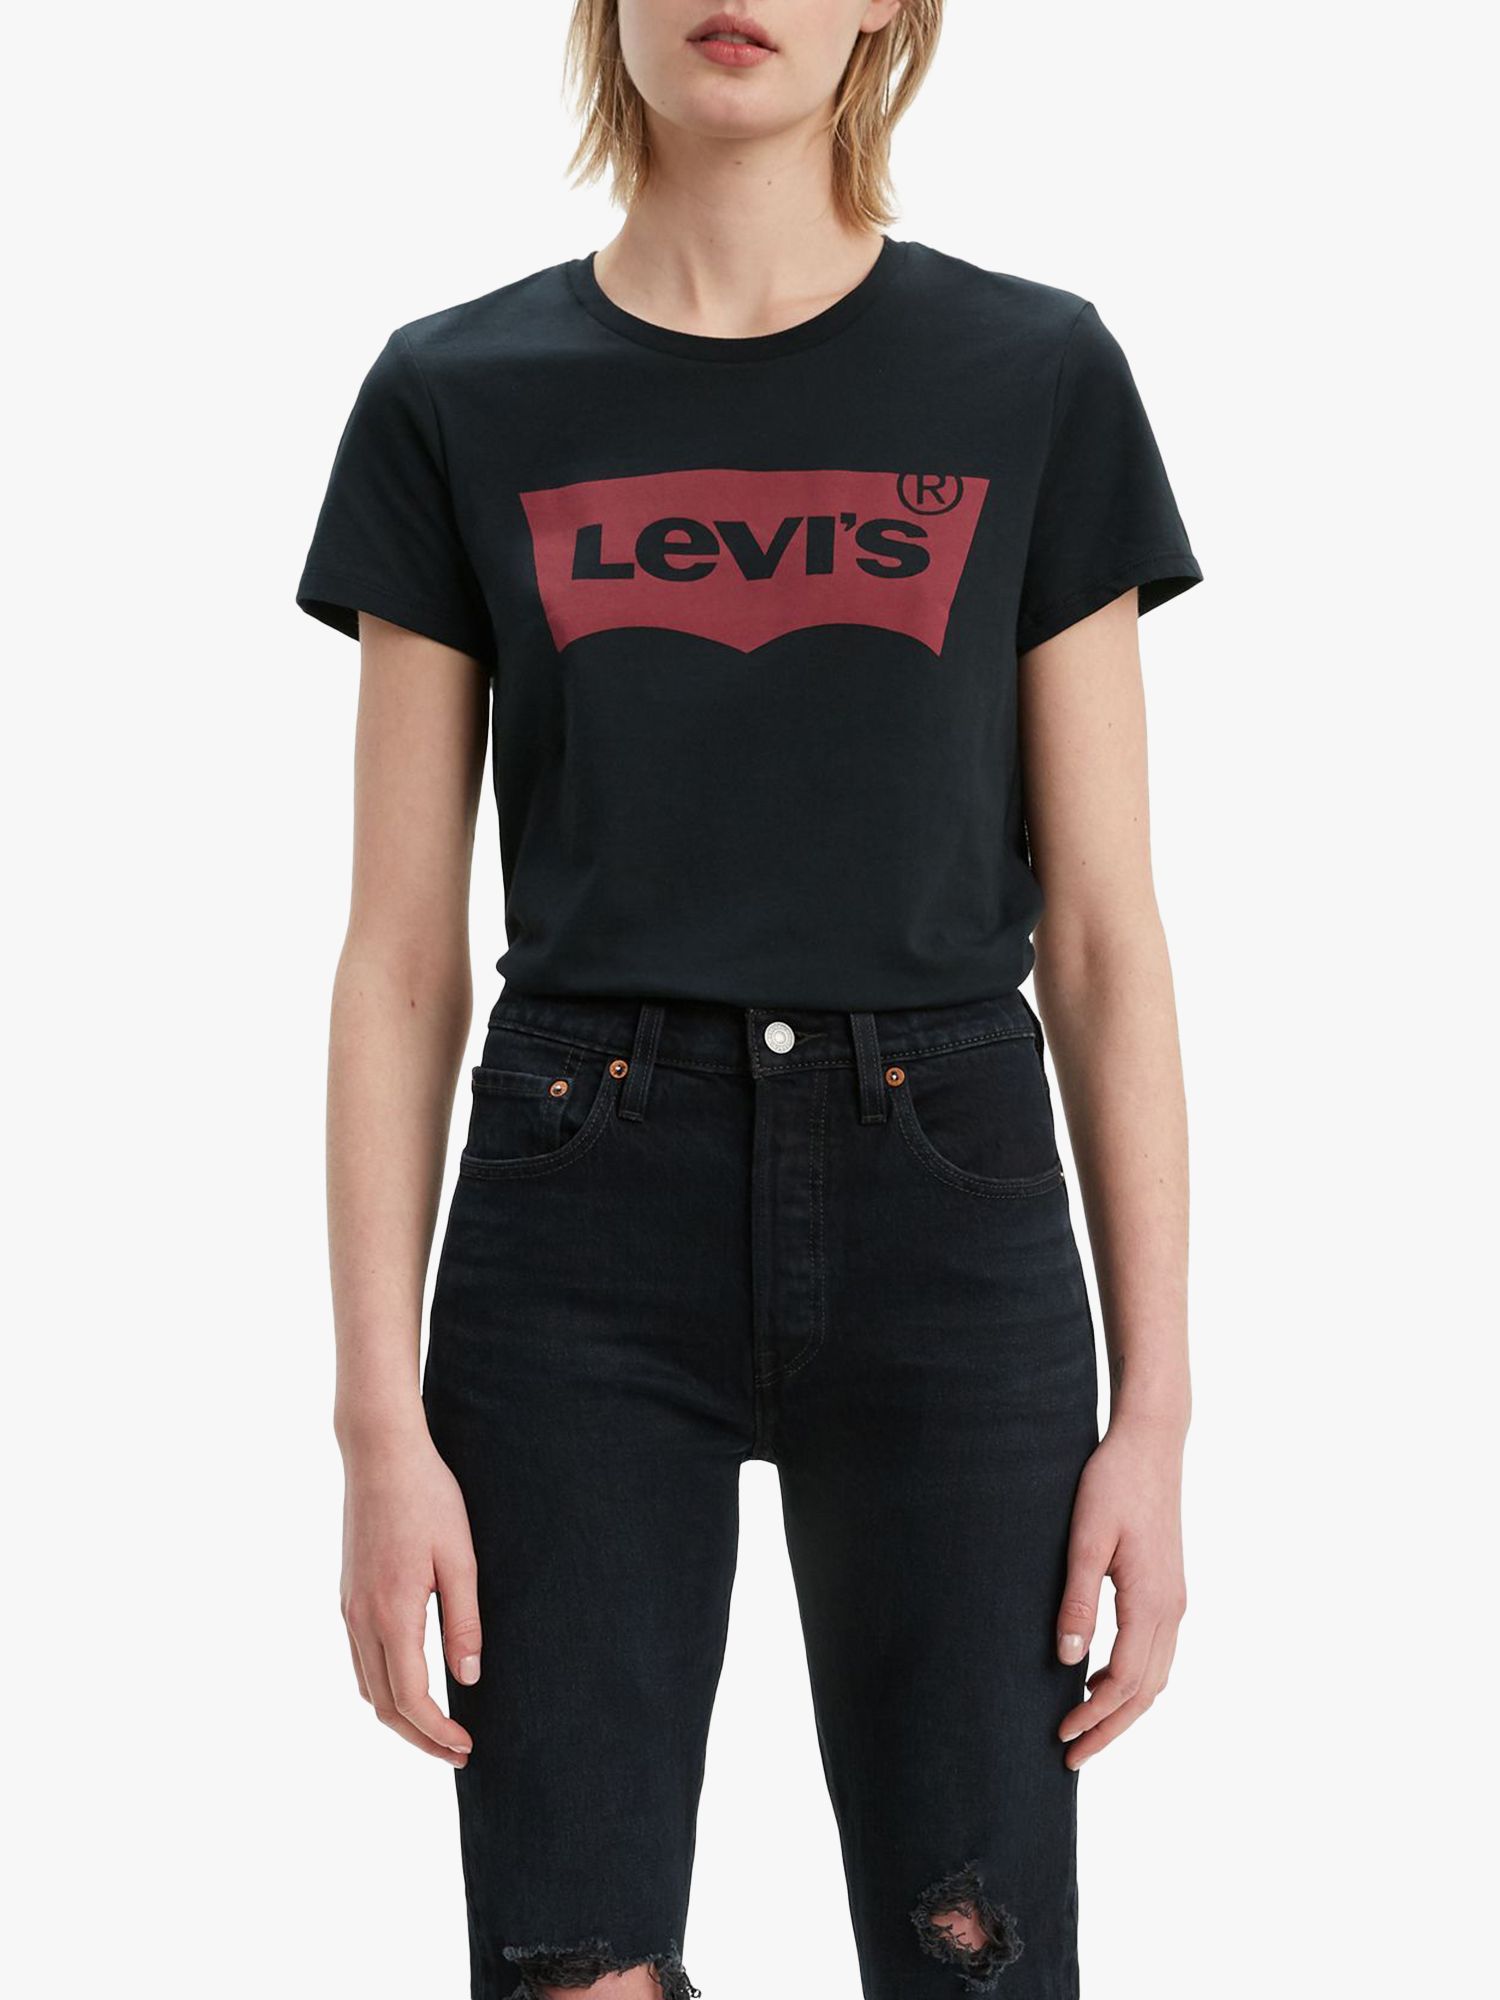 Levi's The Perfect Batwing Logo T-Shirt, Black/Red at John Lewis & Partners